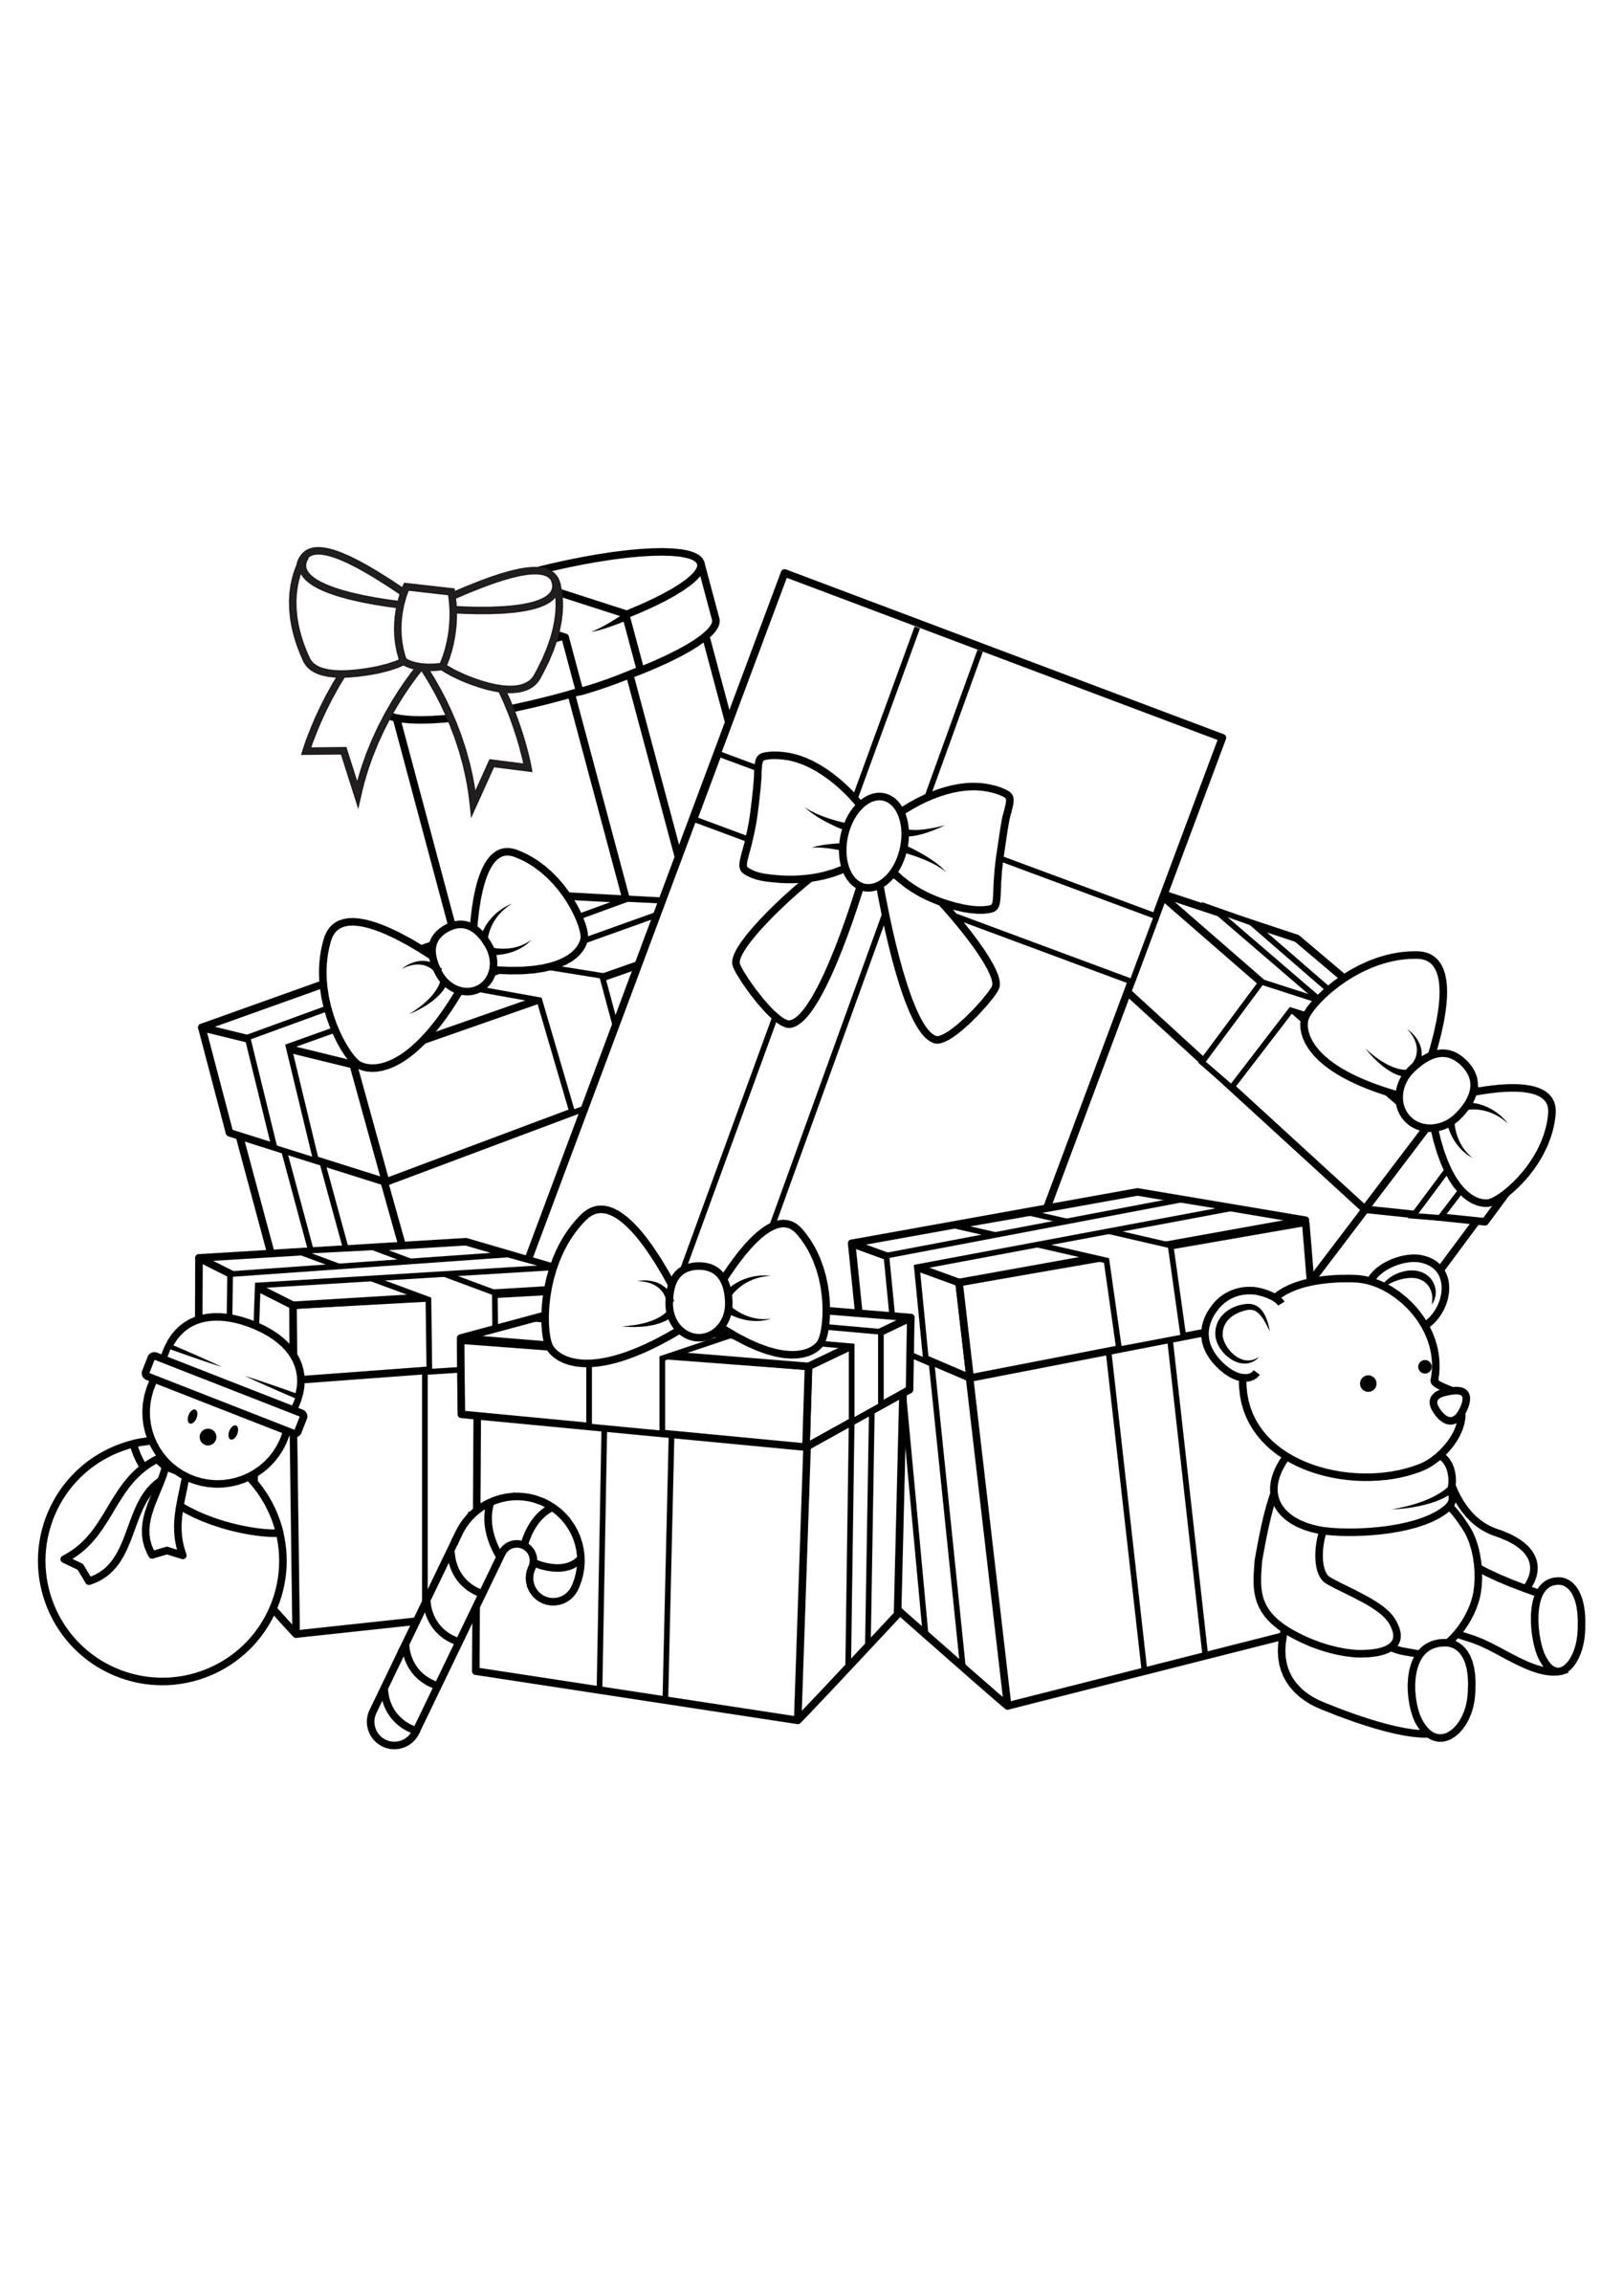 Coloring page Christmas presents